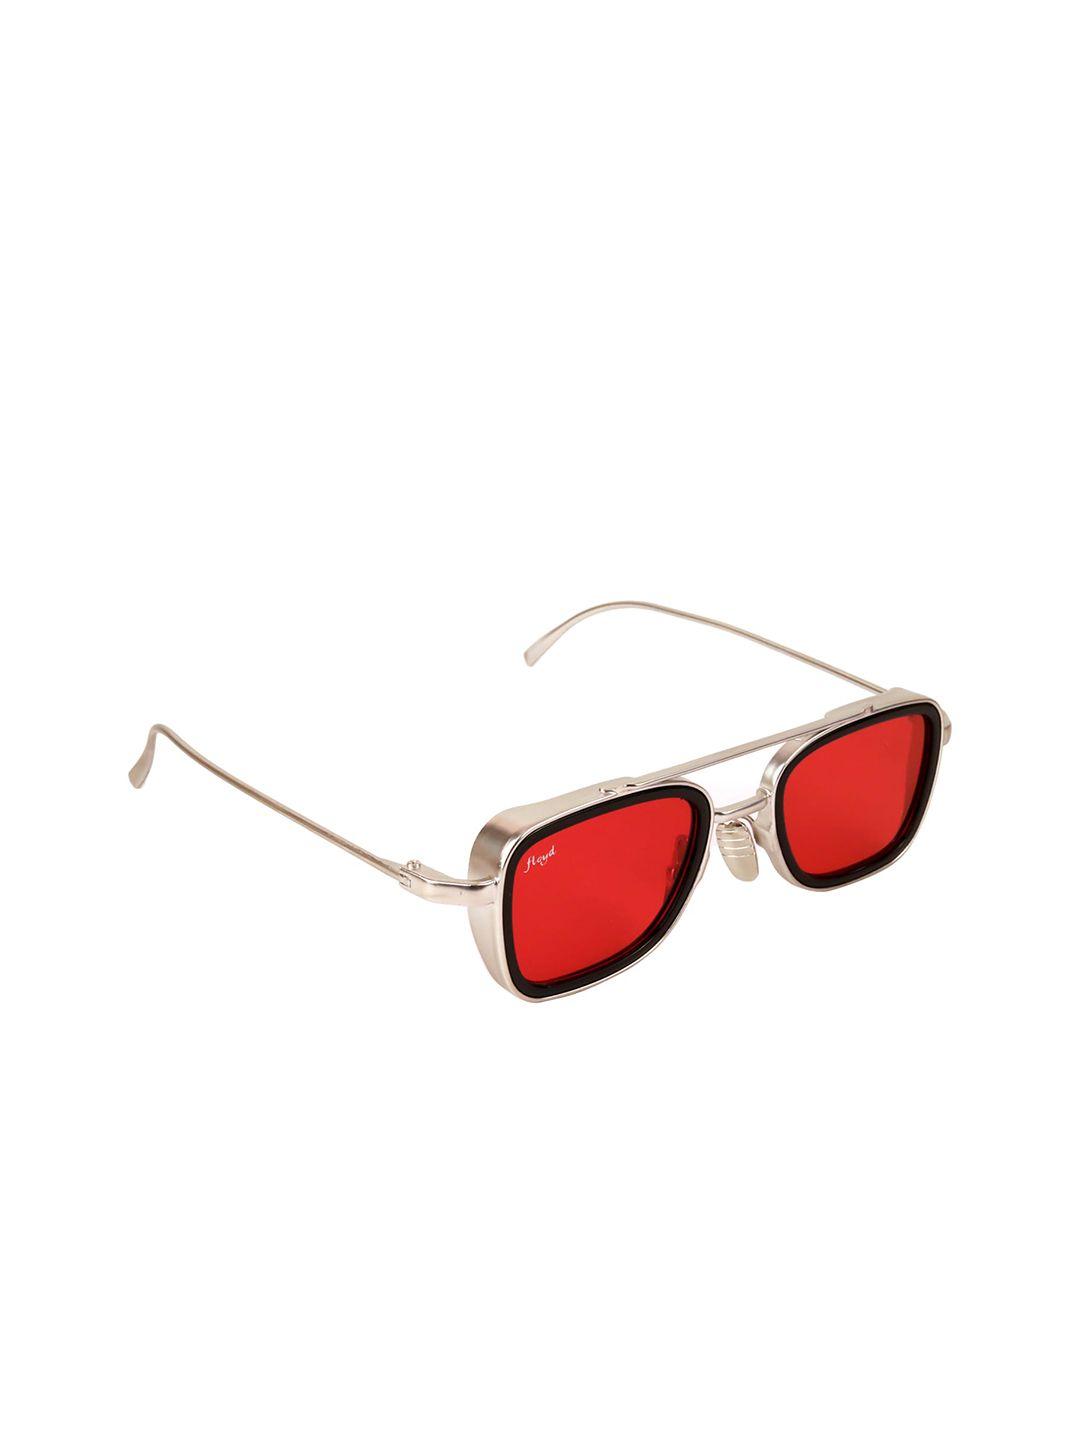 floyd unisex red lens & silver-toned rectangle sunglasses with uv protected lens